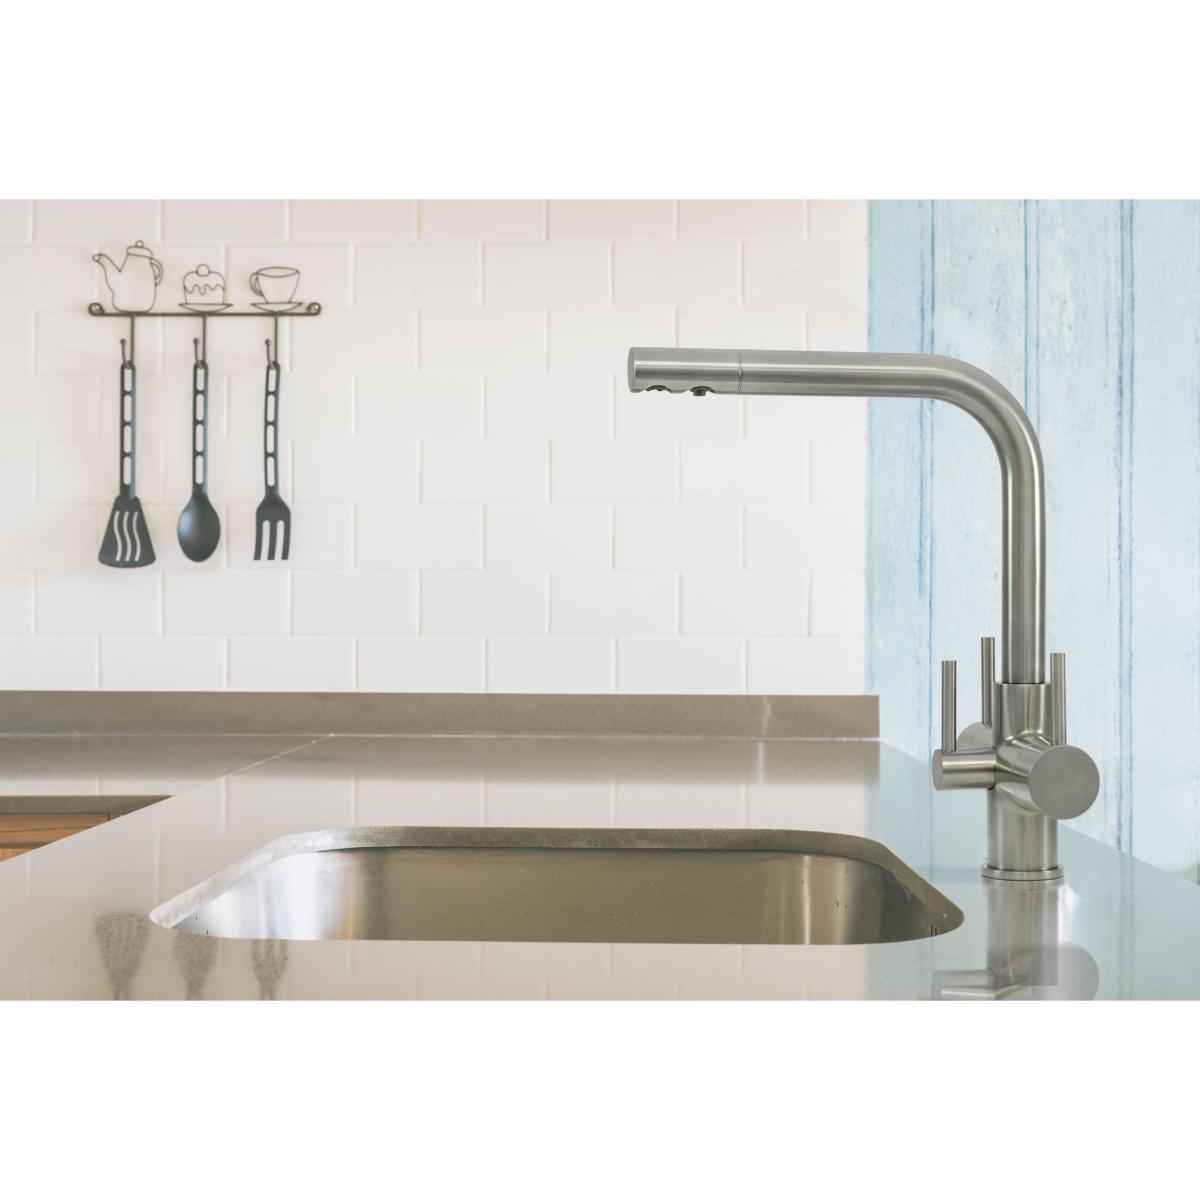 Sorrento 3 Lever 3-Way Kitchen Filter Tap Brushed Steel & Fountain Premier Water Filter System